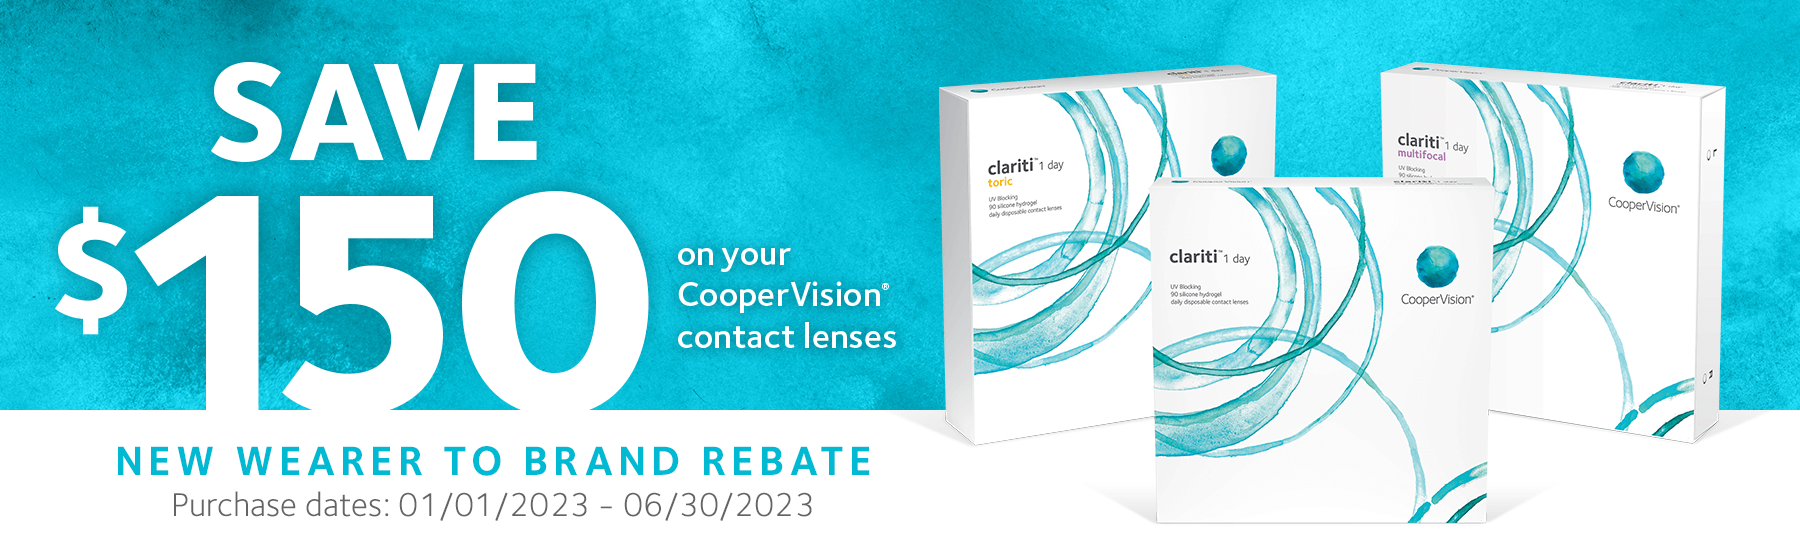 Save $150 on your clariti 1 day contact lenses